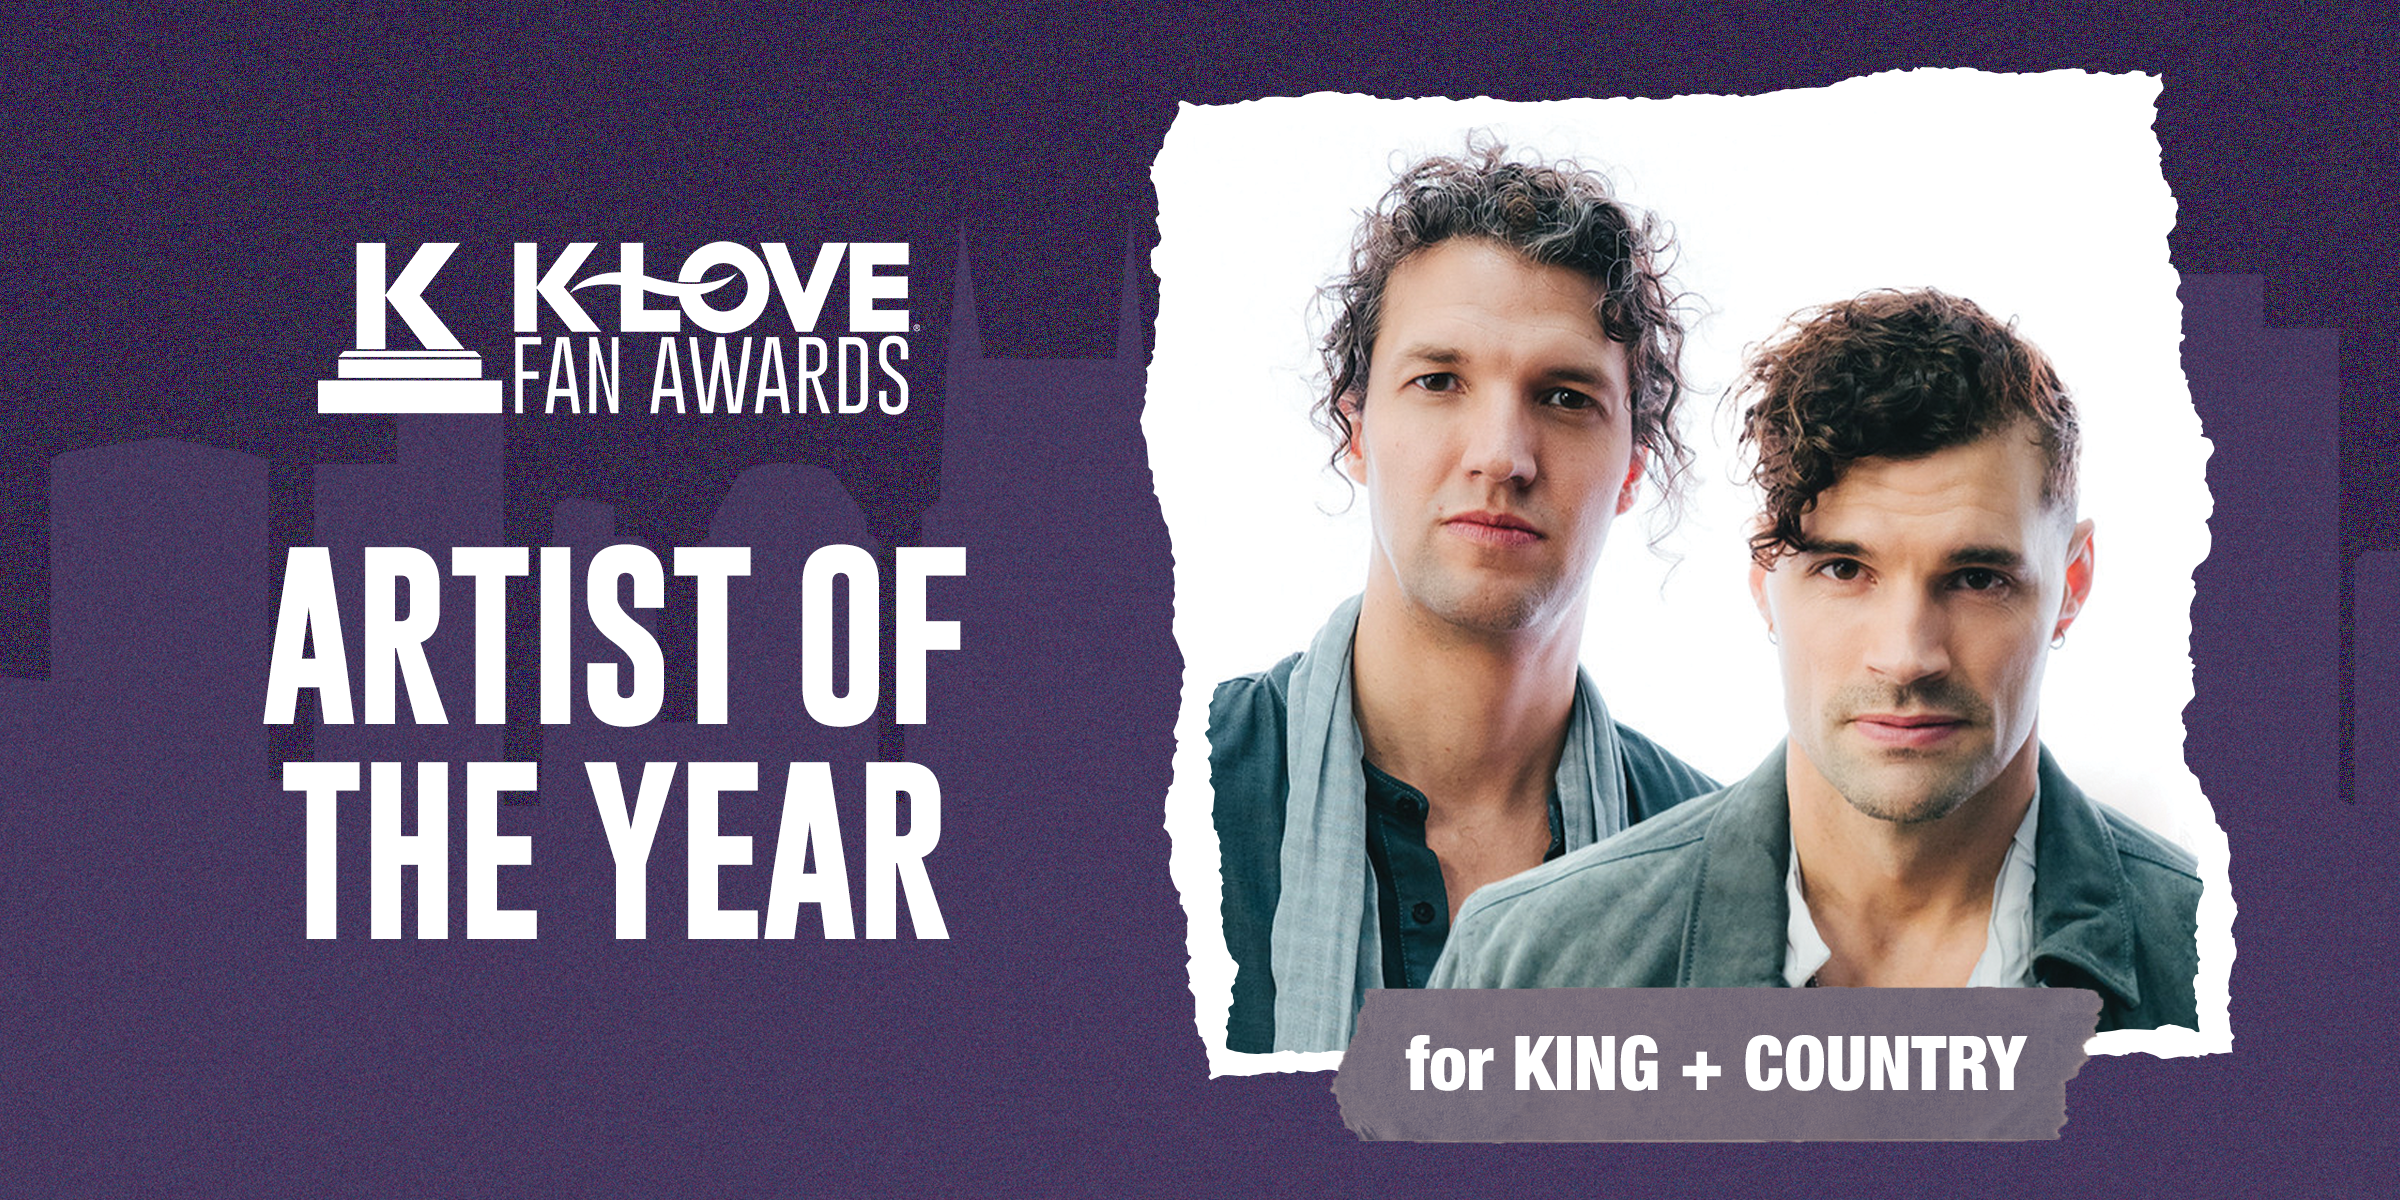 Artist of the Year: for KING + COUNTRY